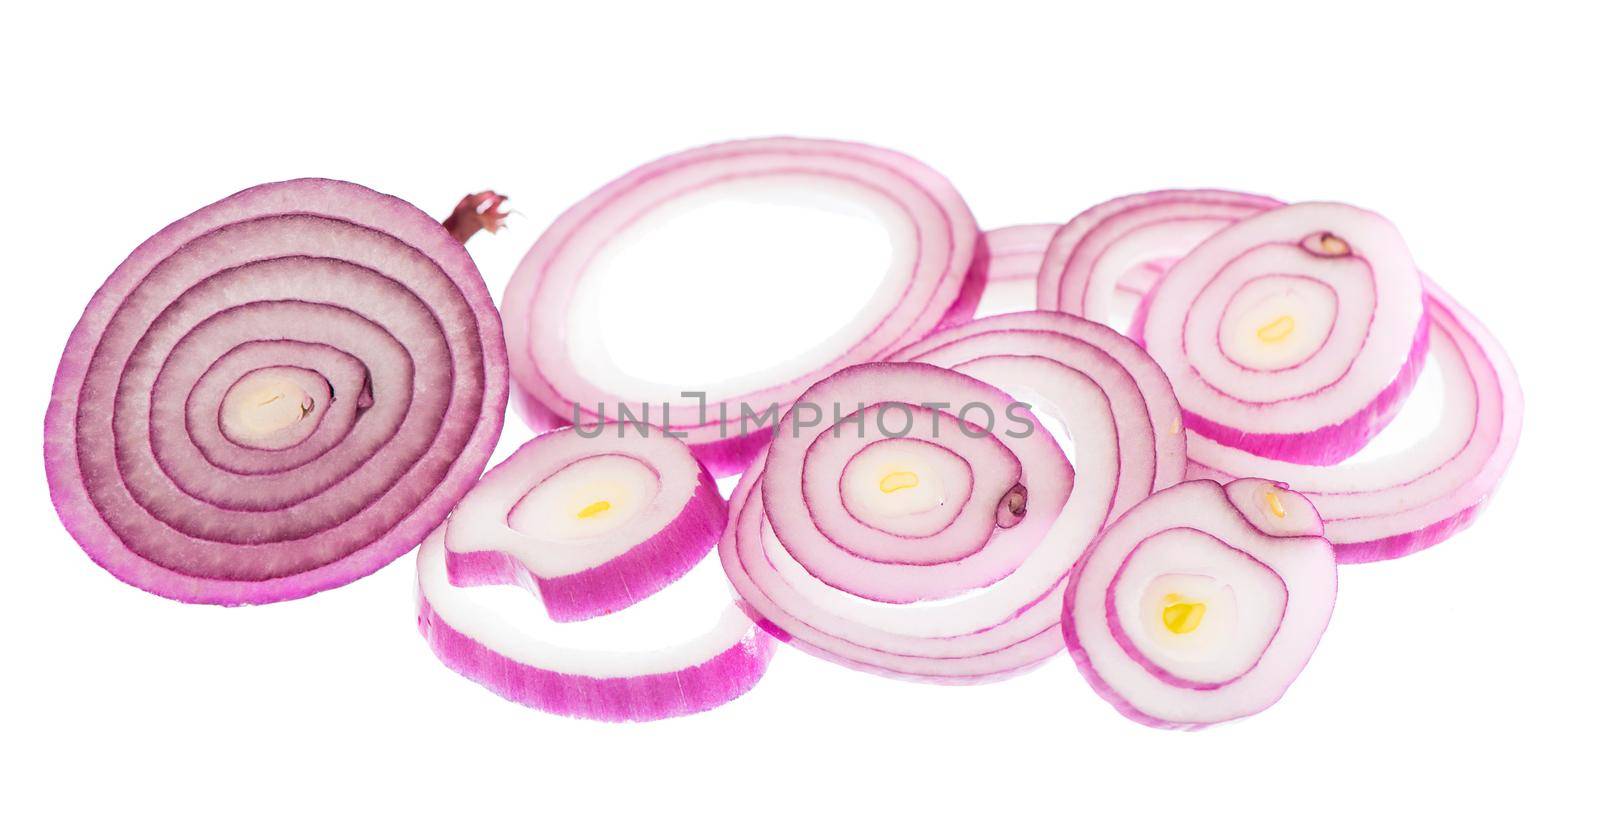 onion cut into rings drops on white background by aprilphoto